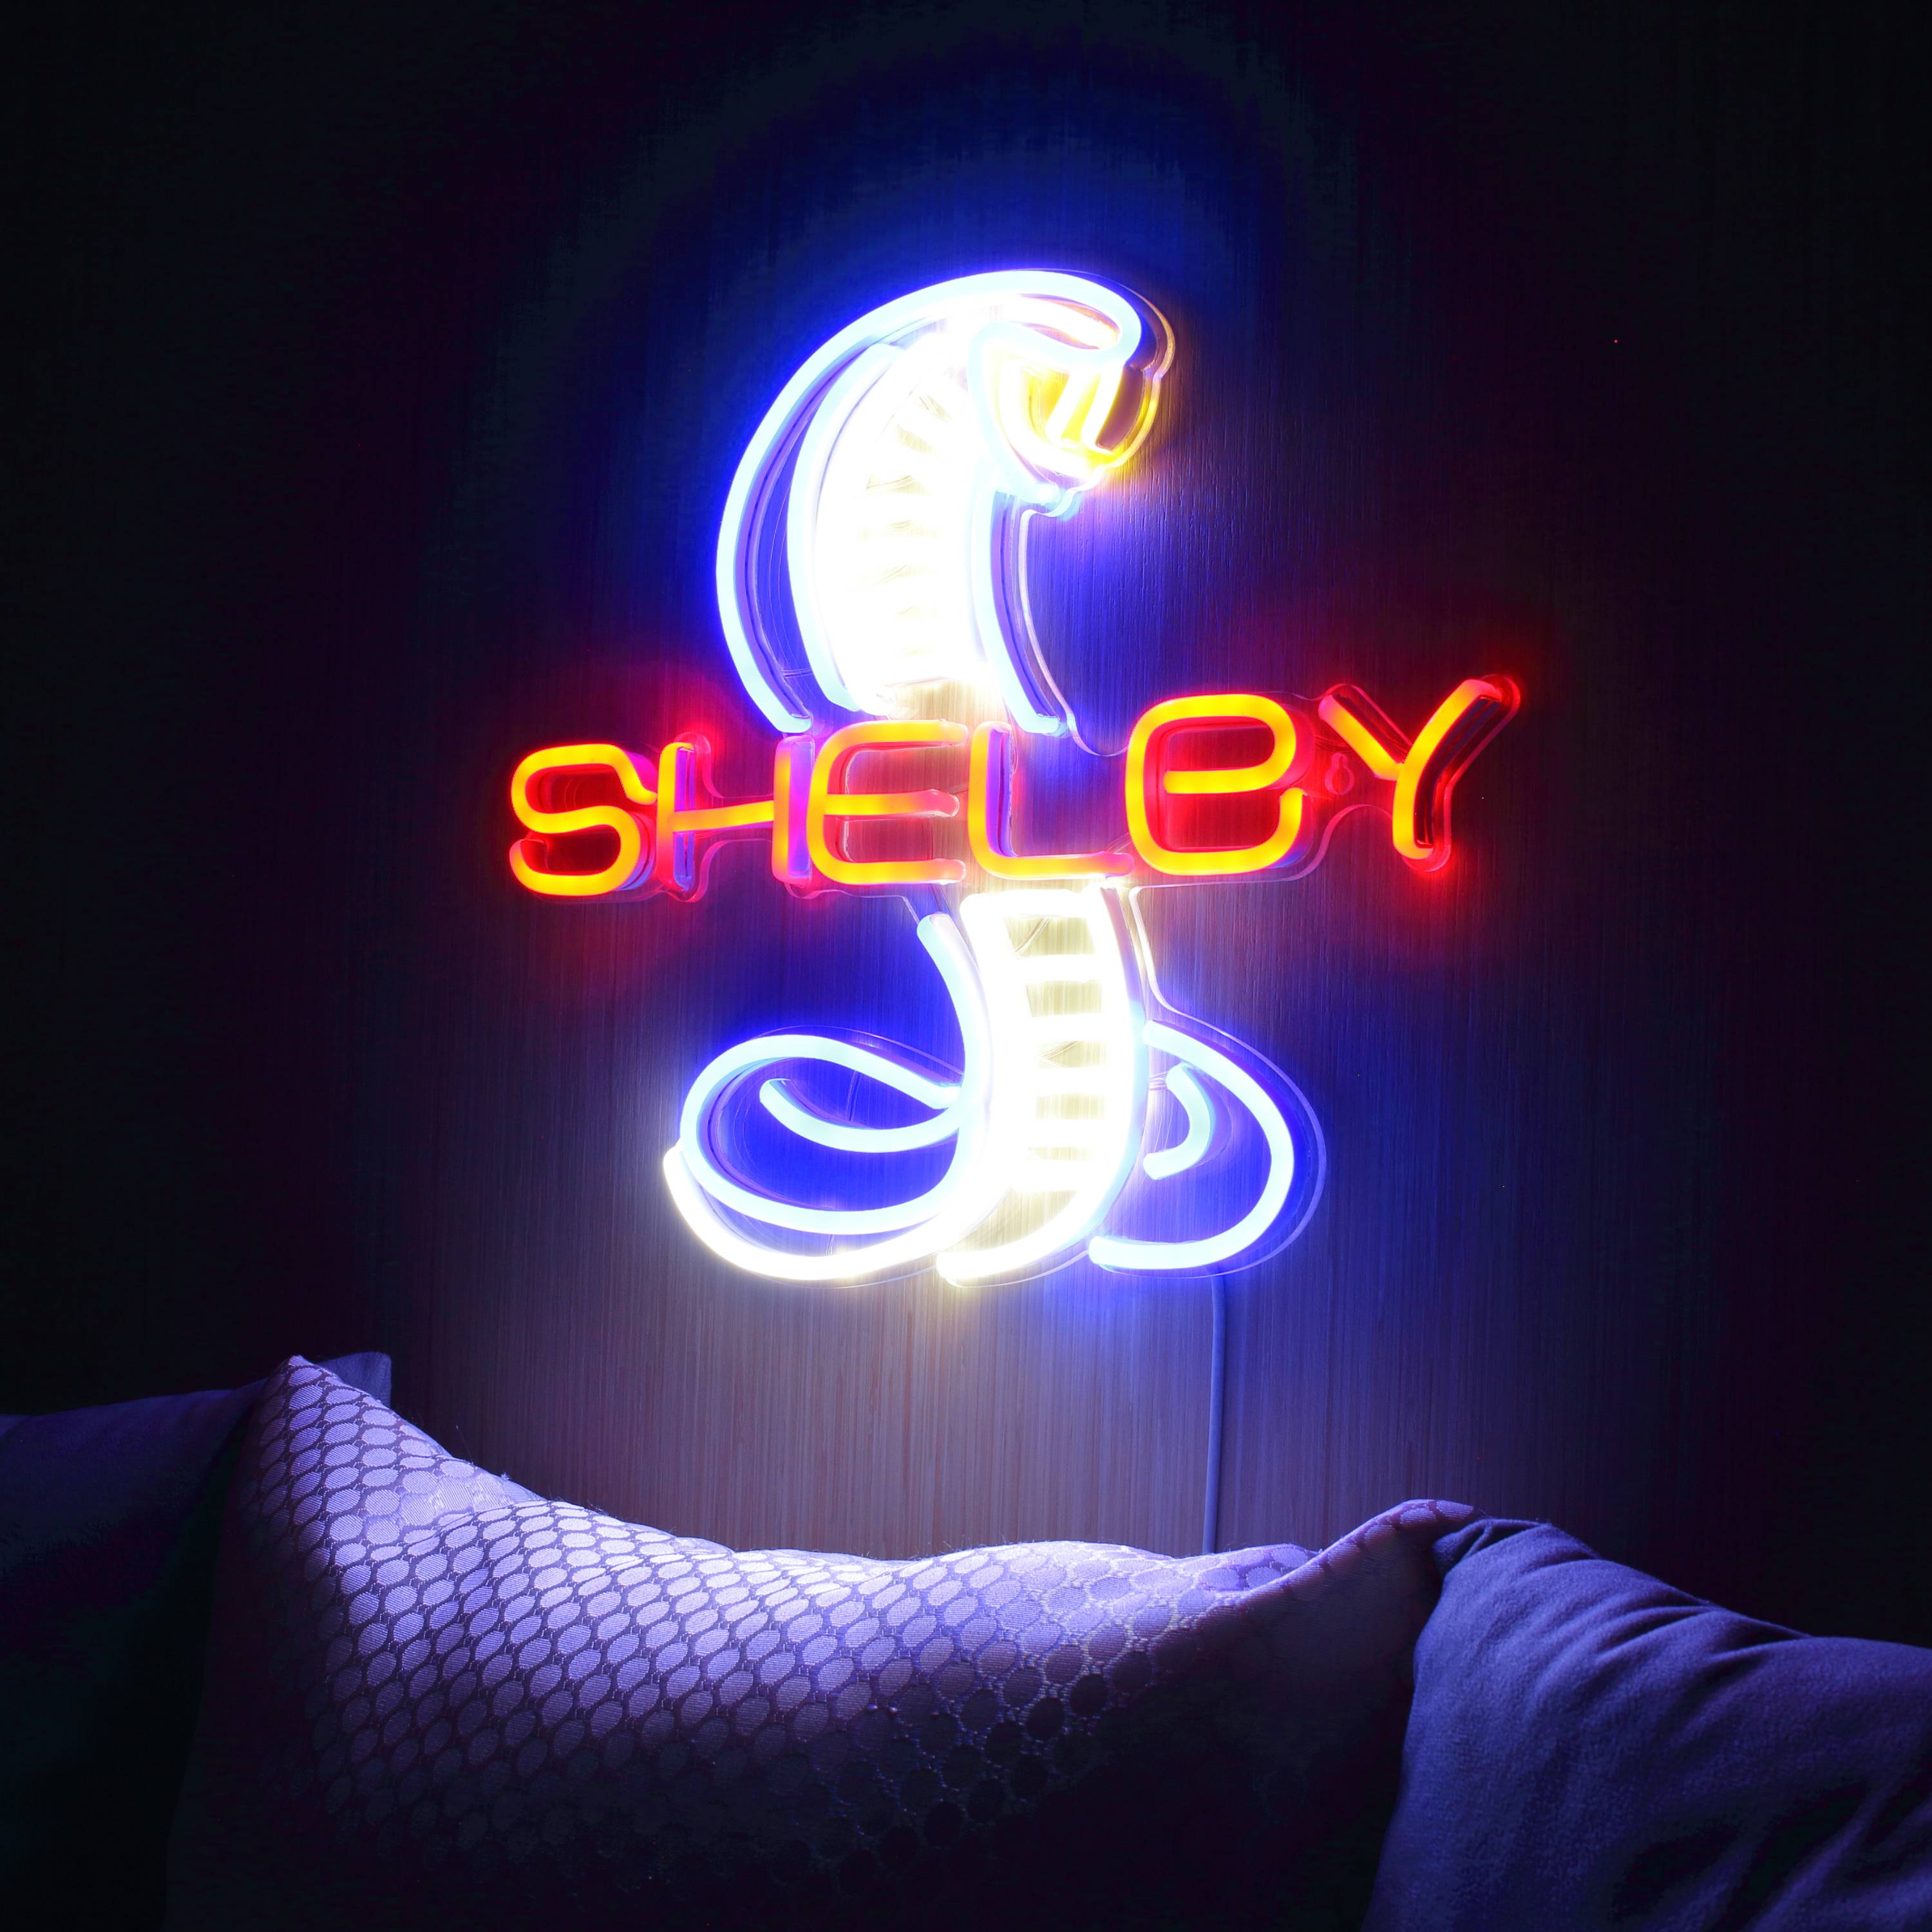 NHL Shelby LED Neon Sign